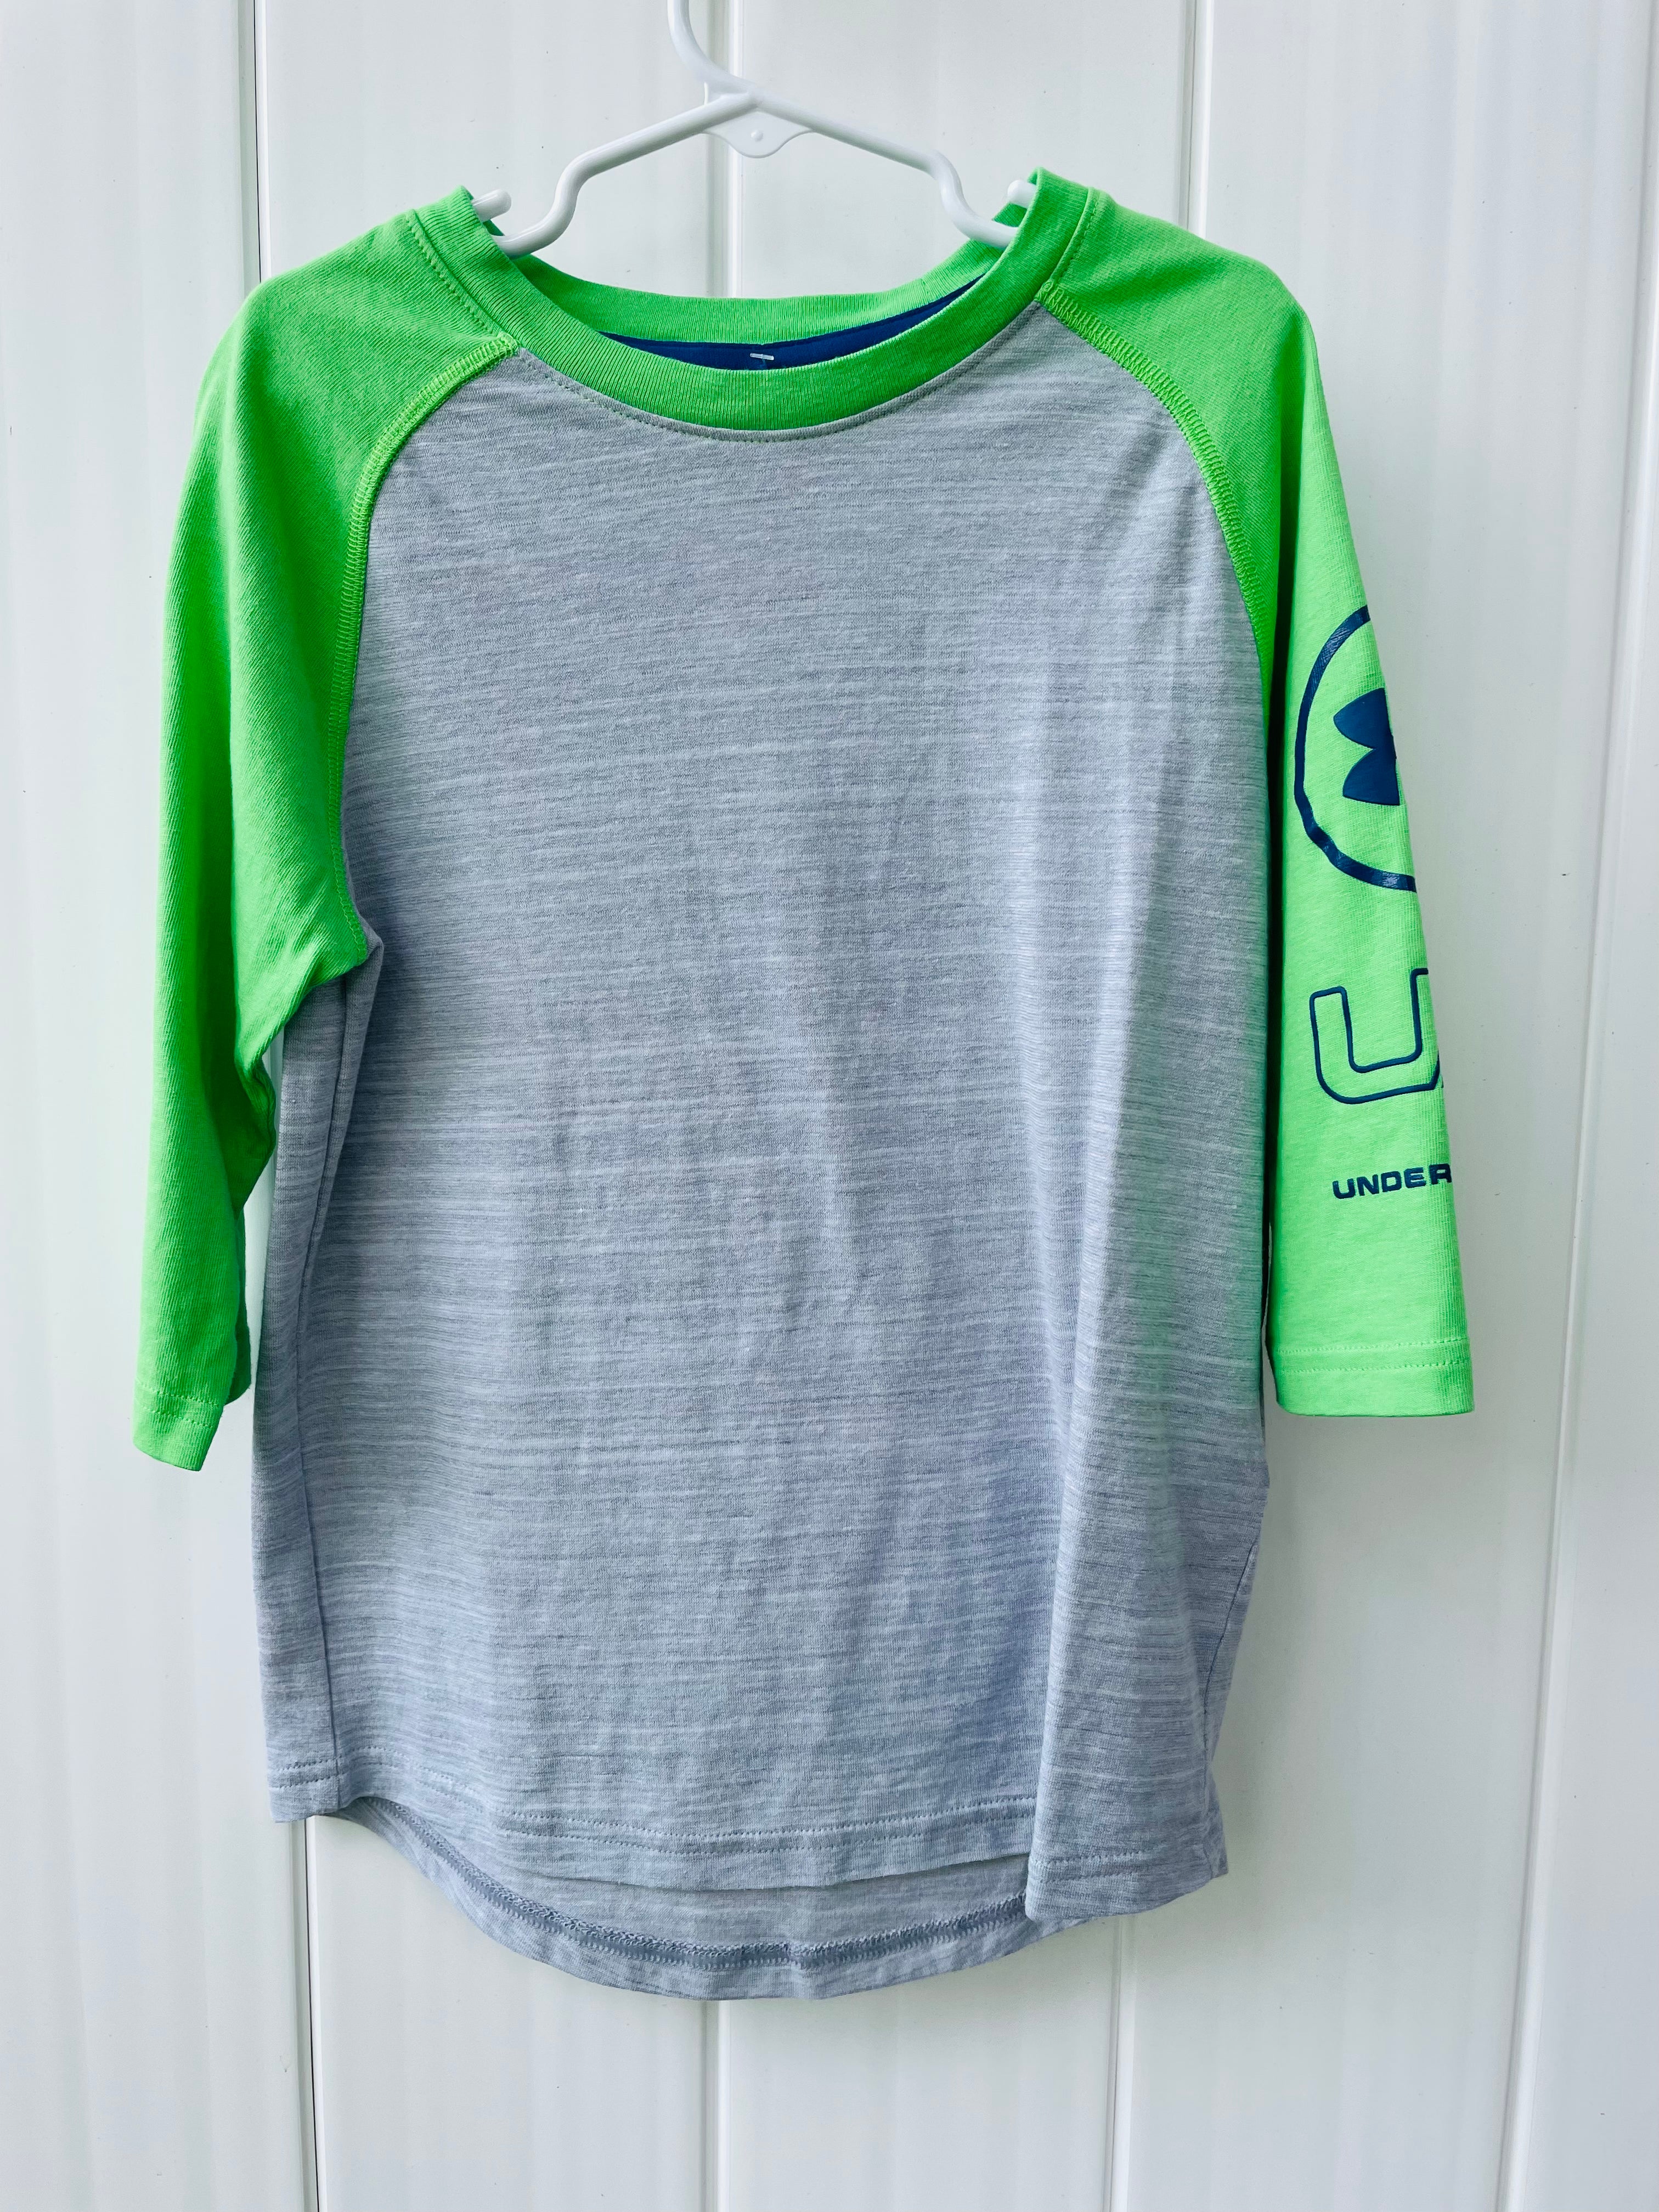 Under Armour Shirt, Gray/Lime Boys Size S